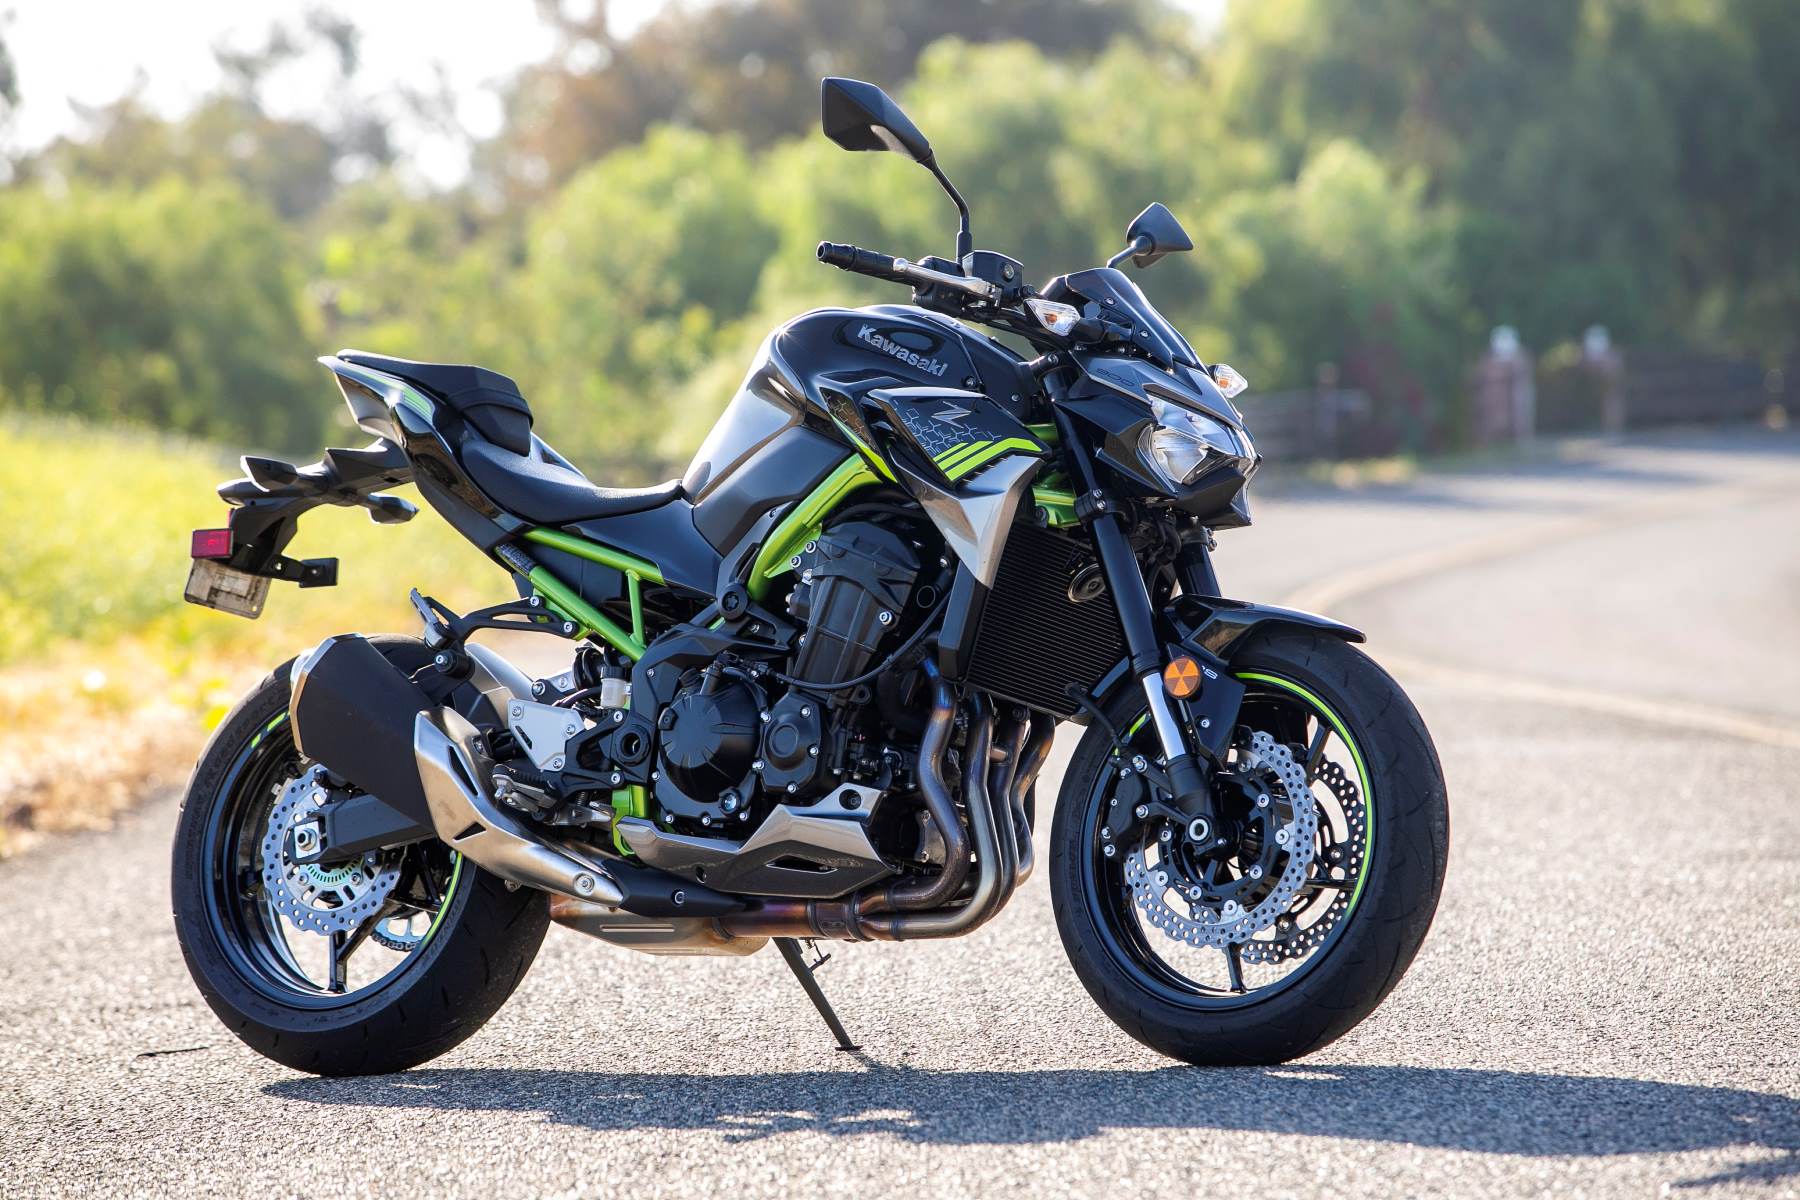 Kawasaki Z900: Your Ultimate Guide to the Iconic Motorcycle